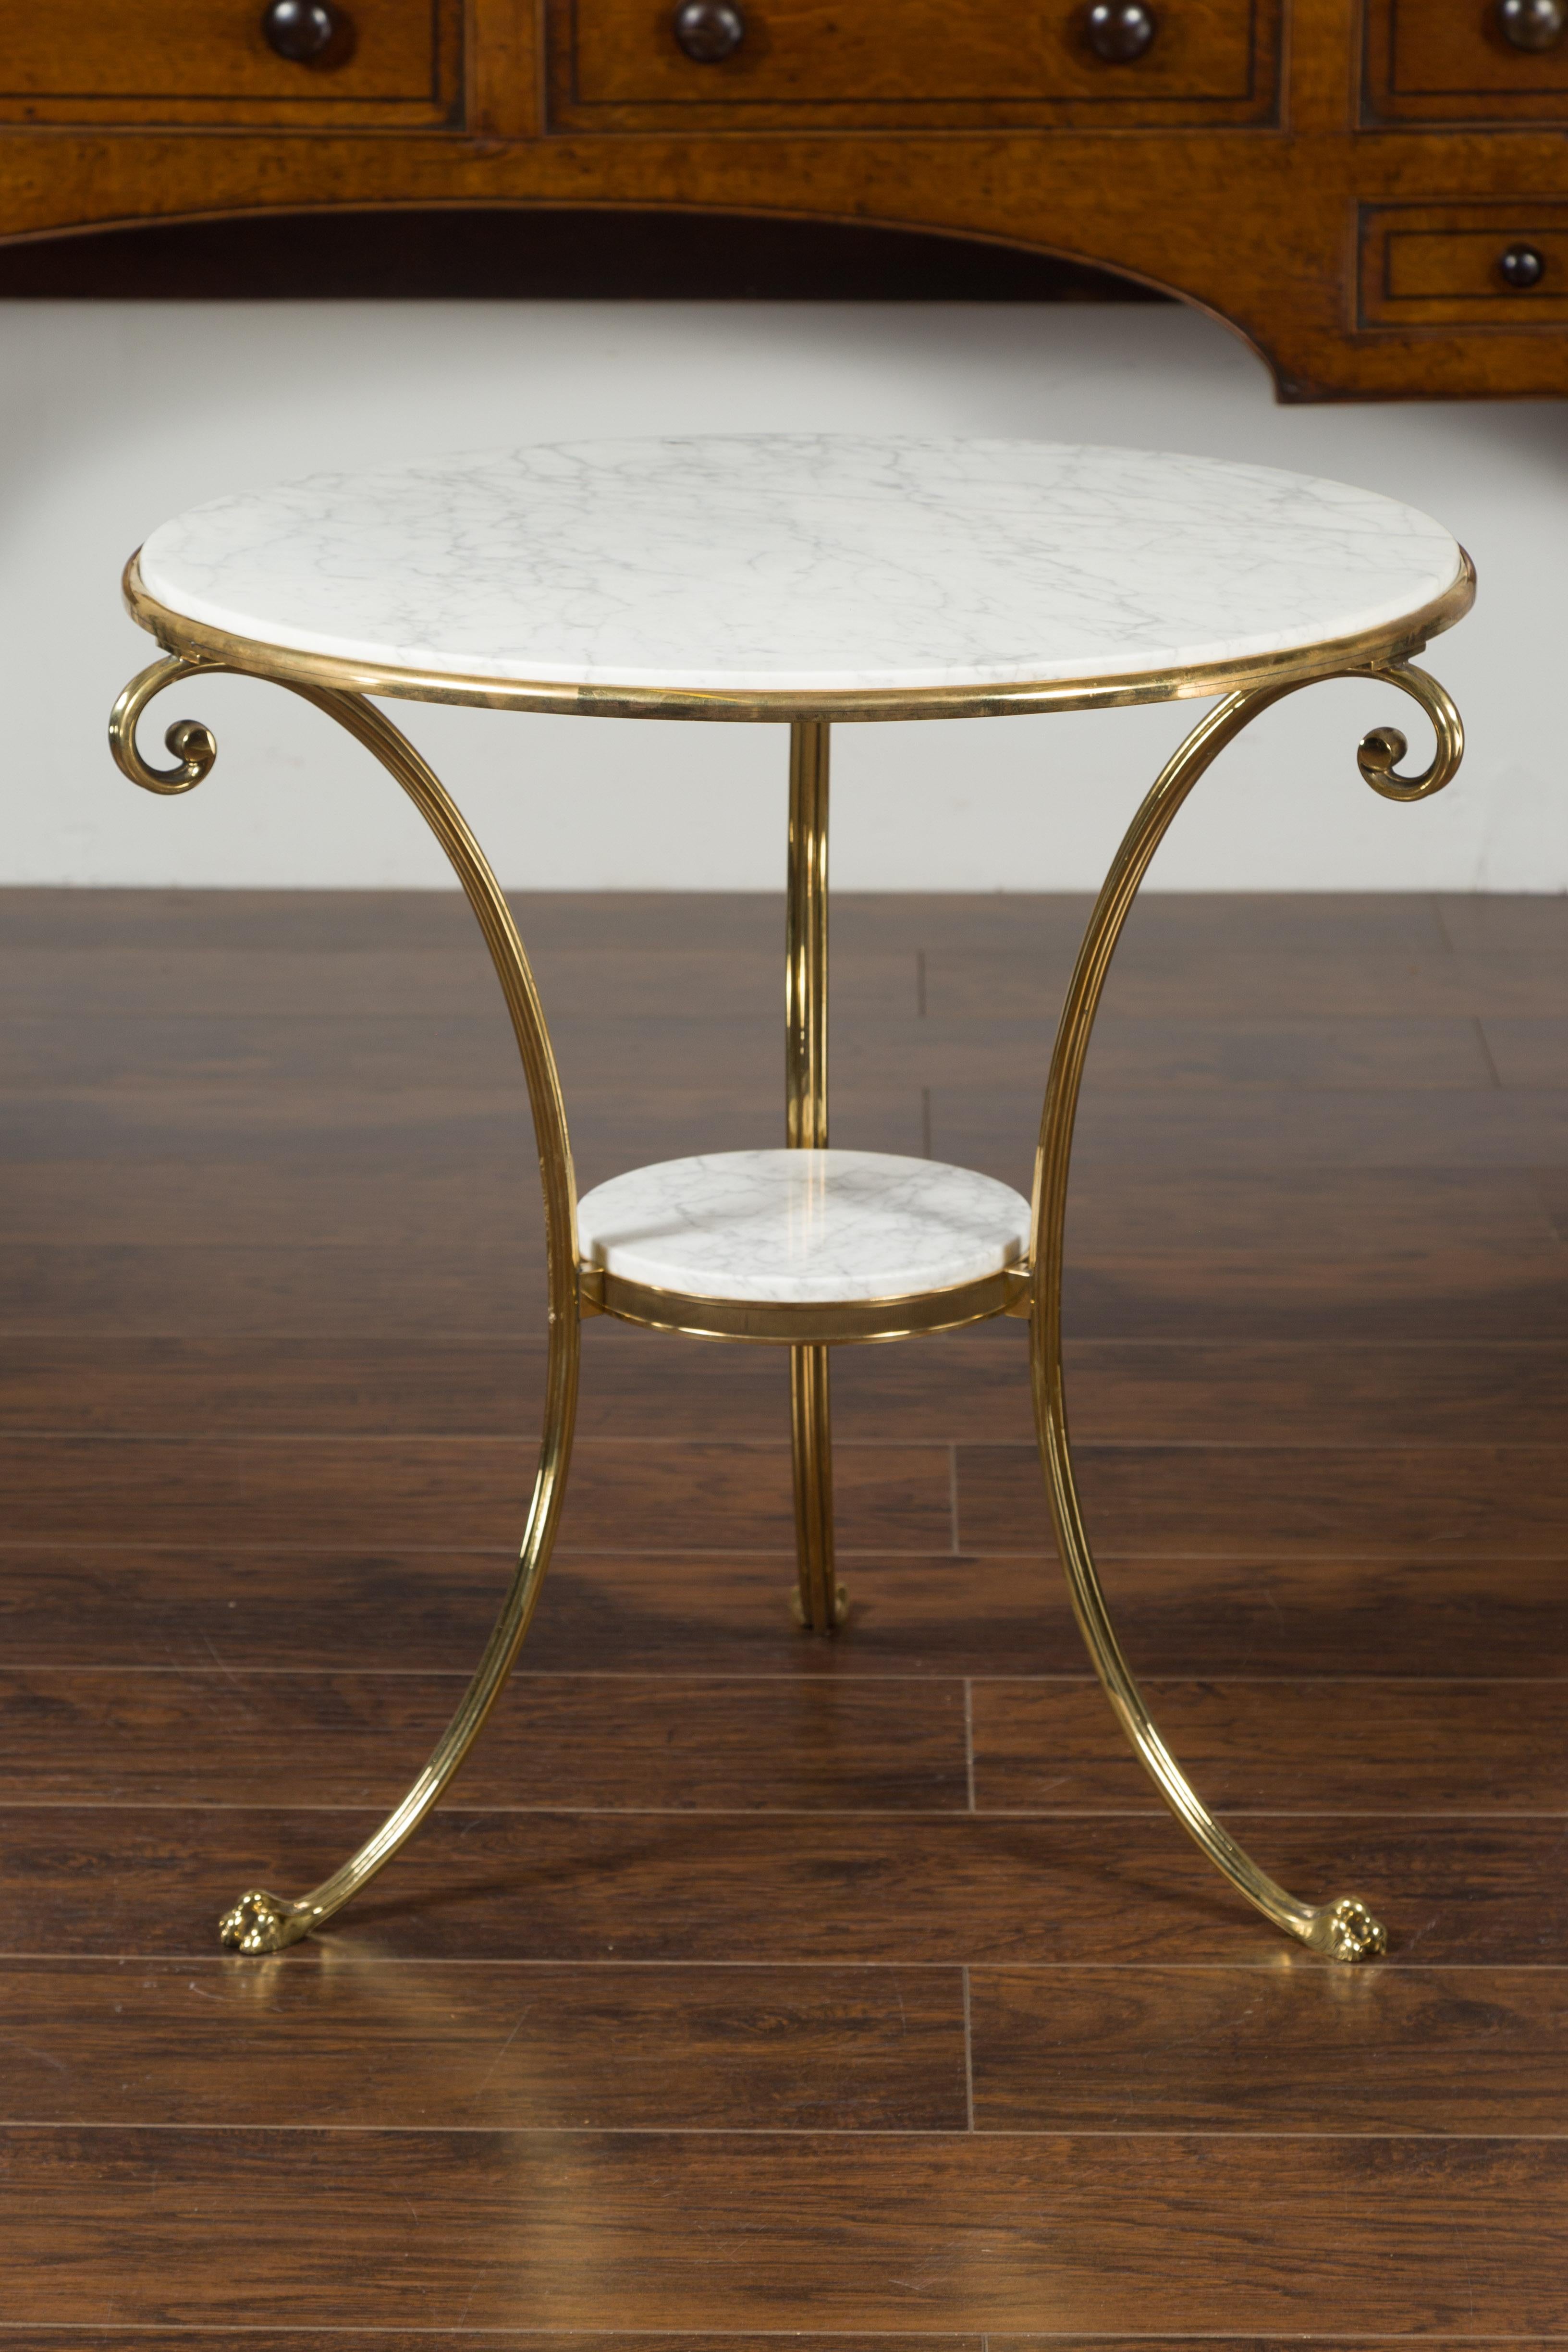 Midcentury Italian Brass Table with Round White Marble Top and Scrolling Legs 2